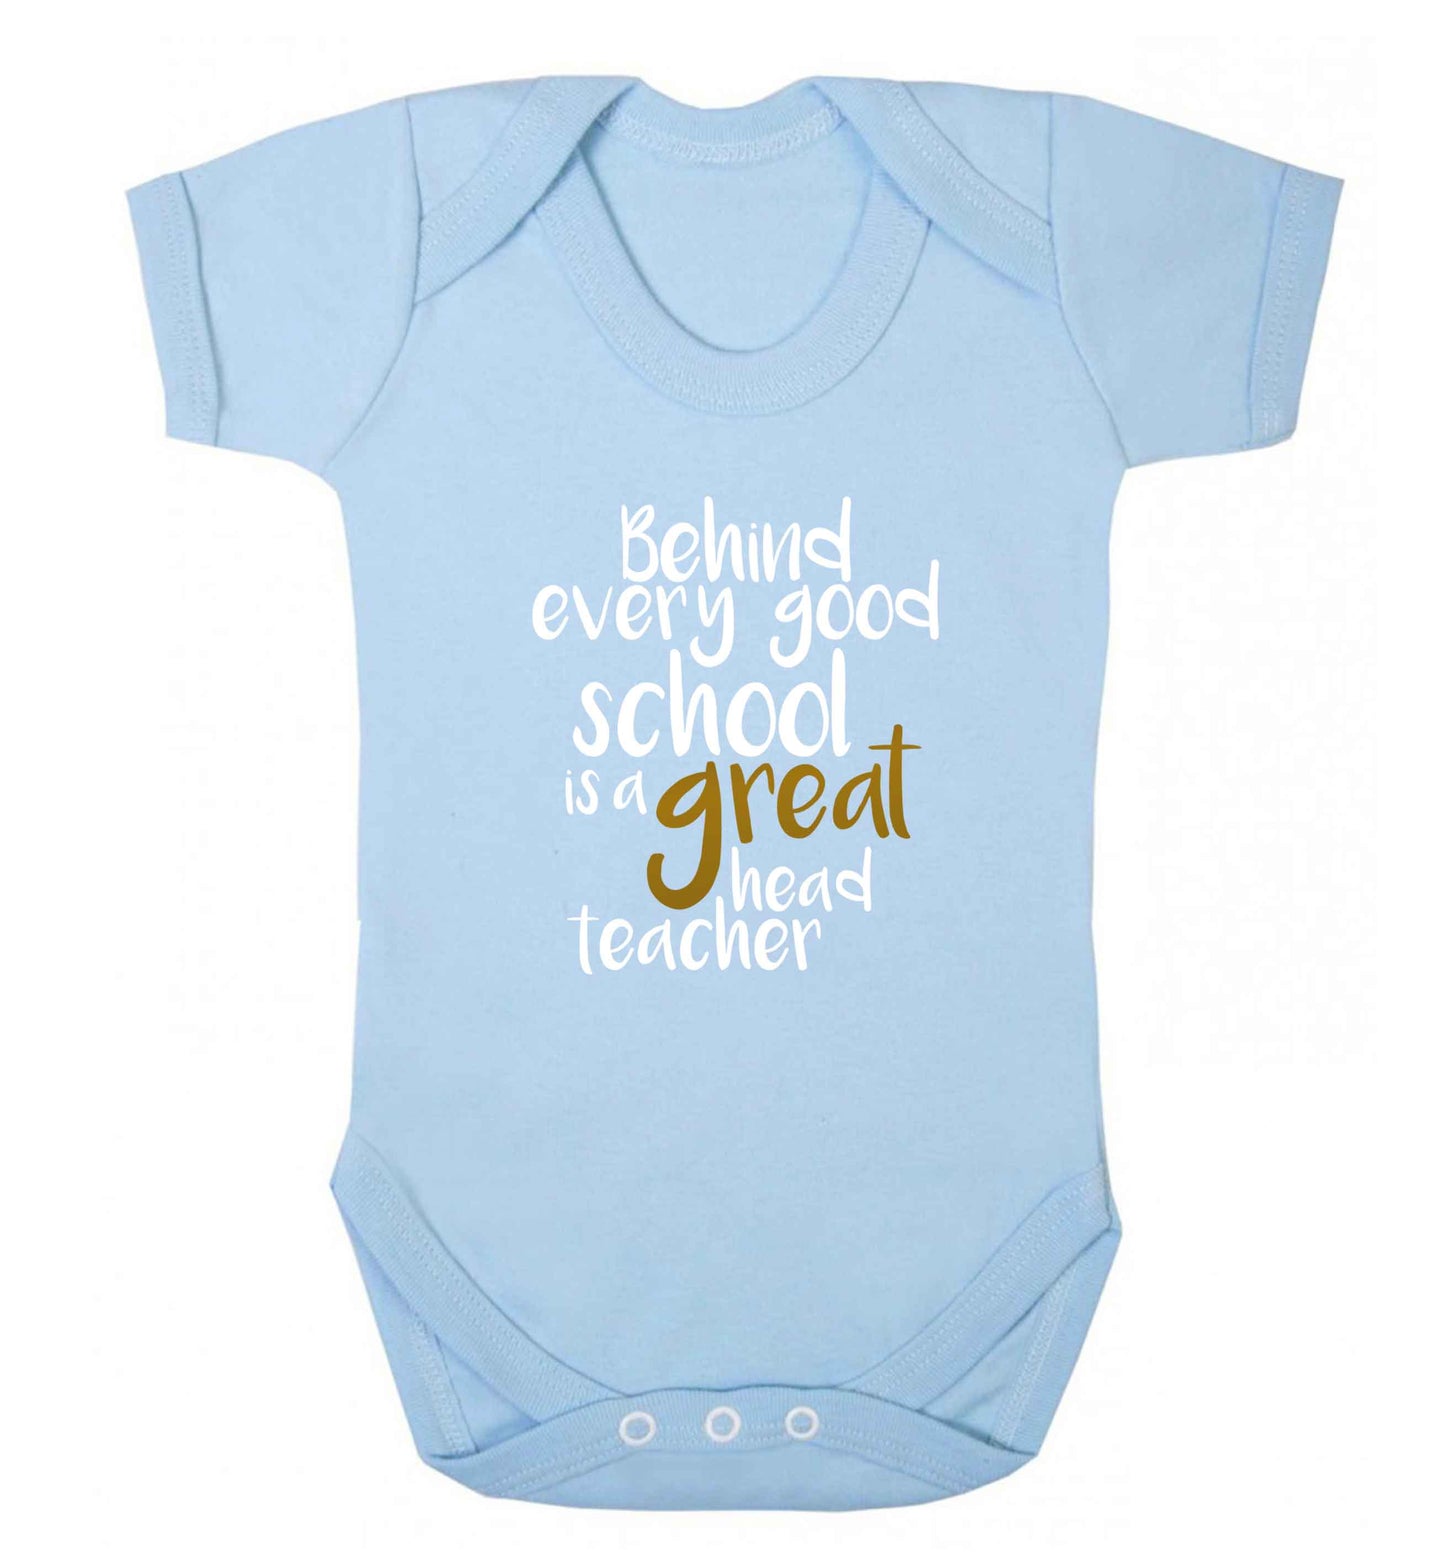 Behind every good school is a great head teacher baby vest pale blue 18-24 months